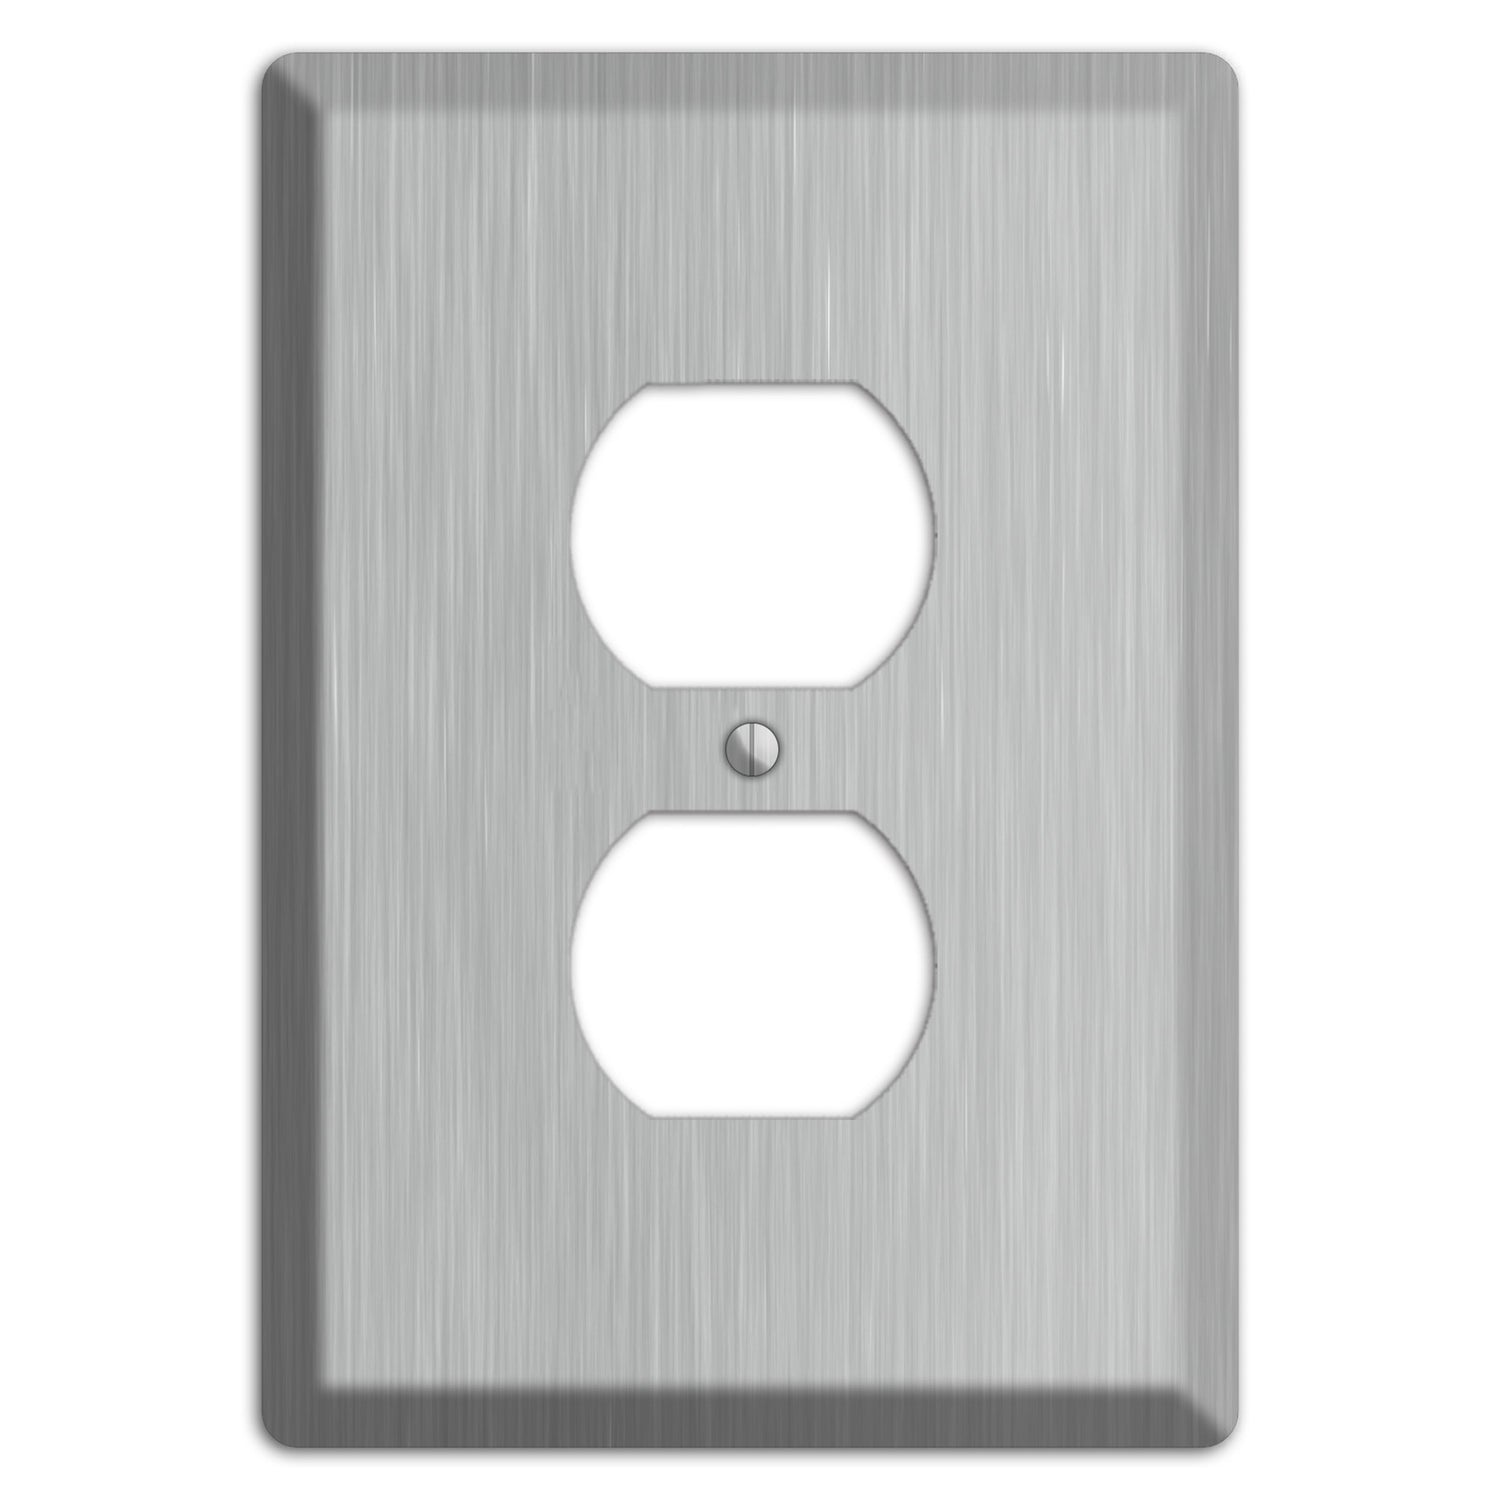 Brushed Stainless Steel Duplex Outlet Wallplate